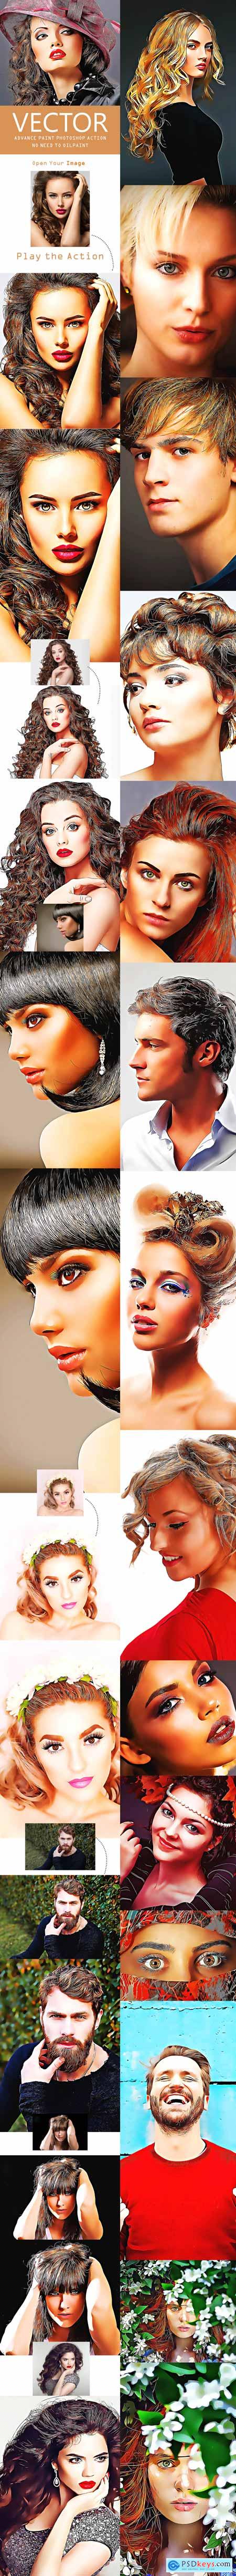 Vector Advance Painting Photoshop Action 22273023